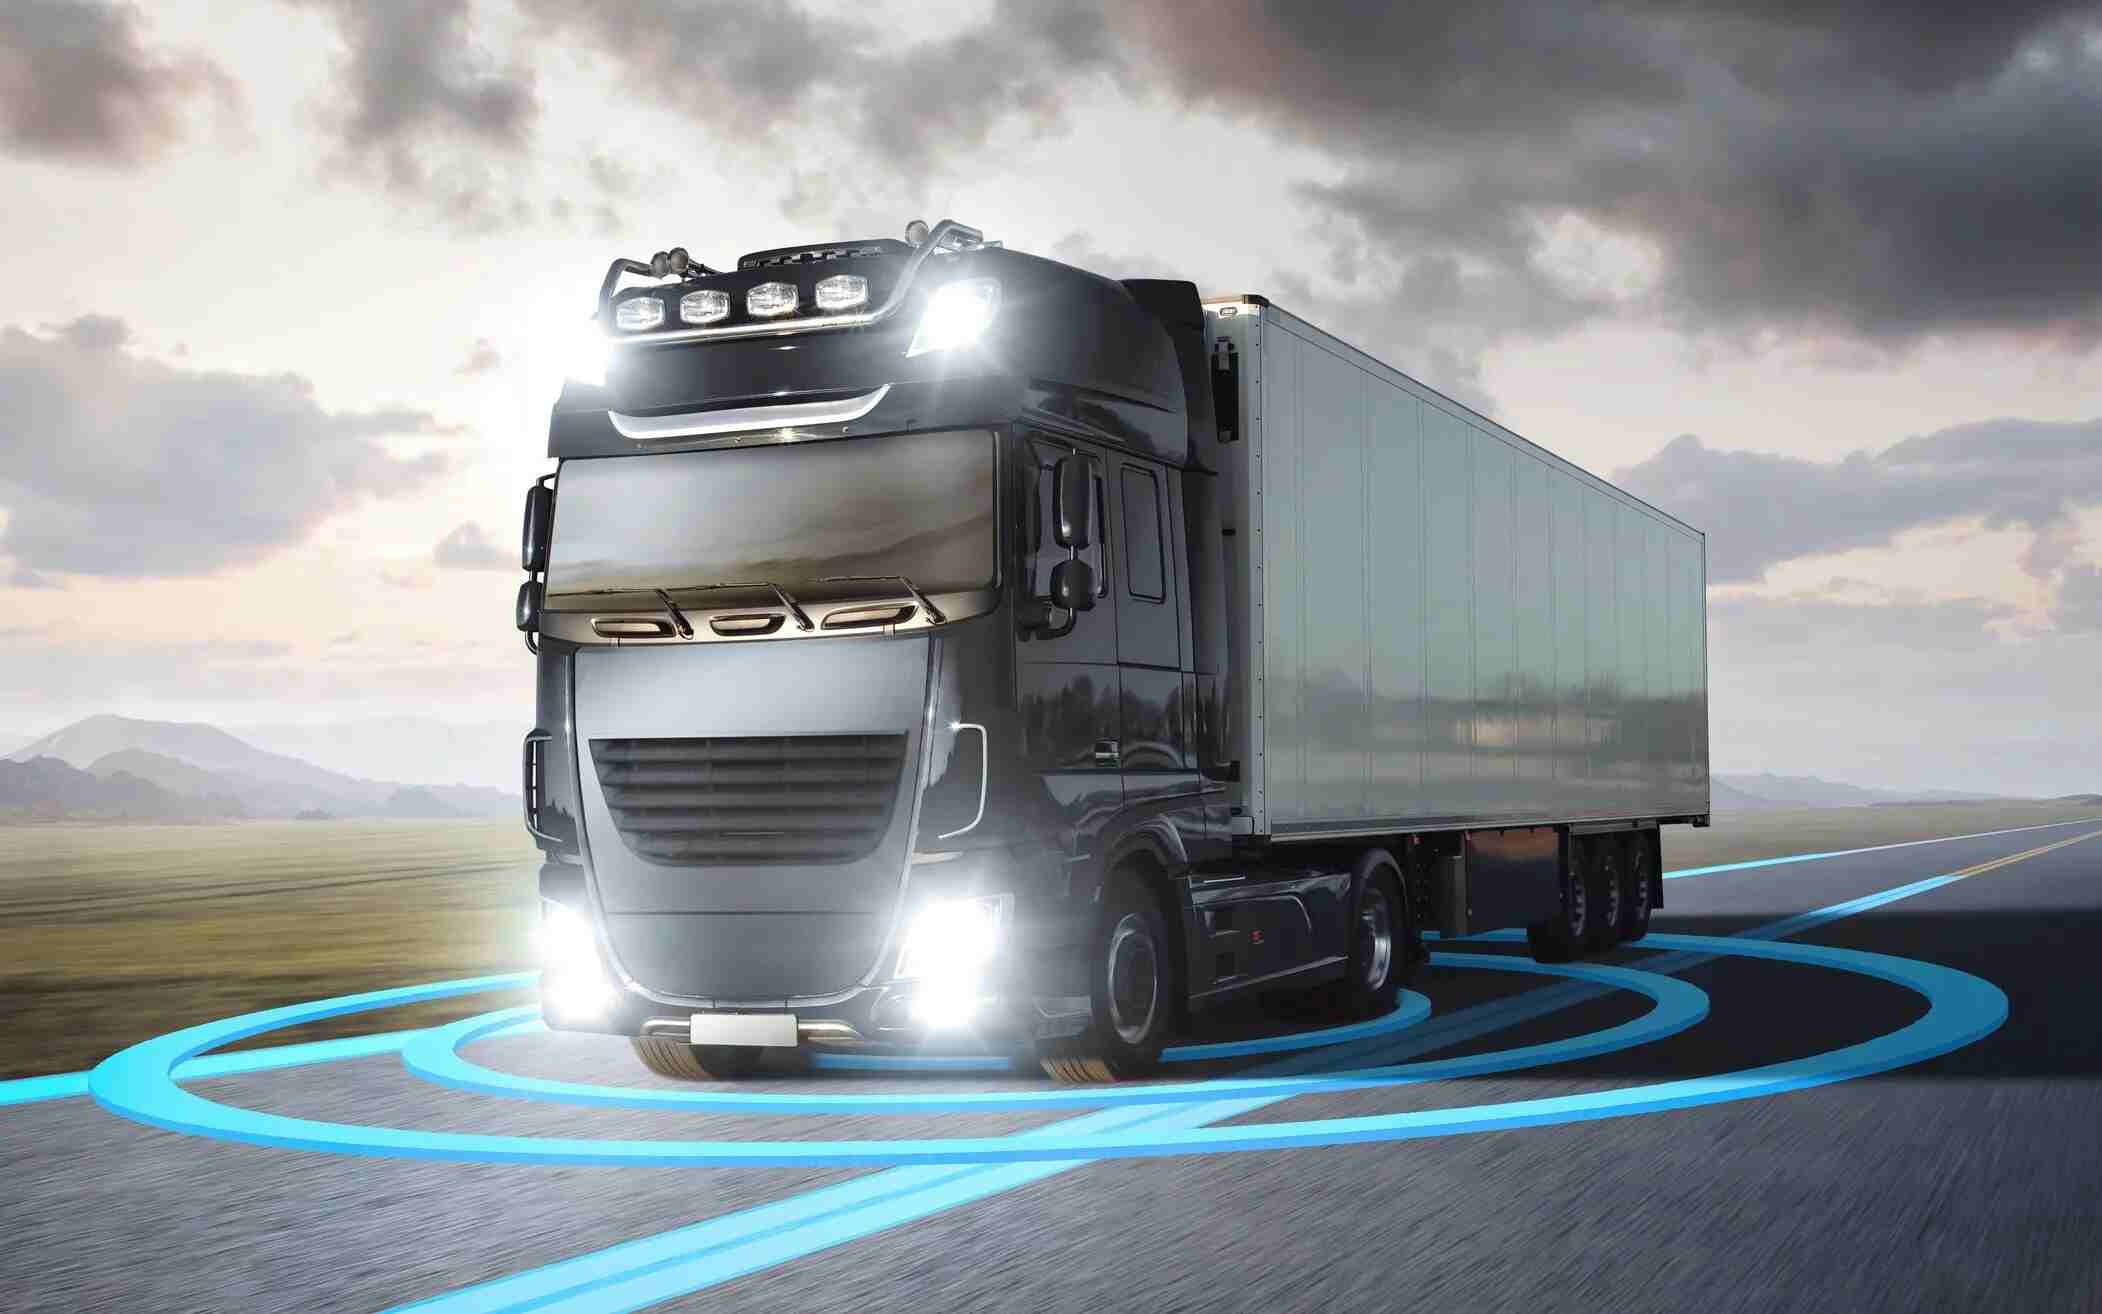 Autonomous Trucks Make the Most Compelling Case for Automation in Heavy-Duty Vehicles, Says IDTechEx